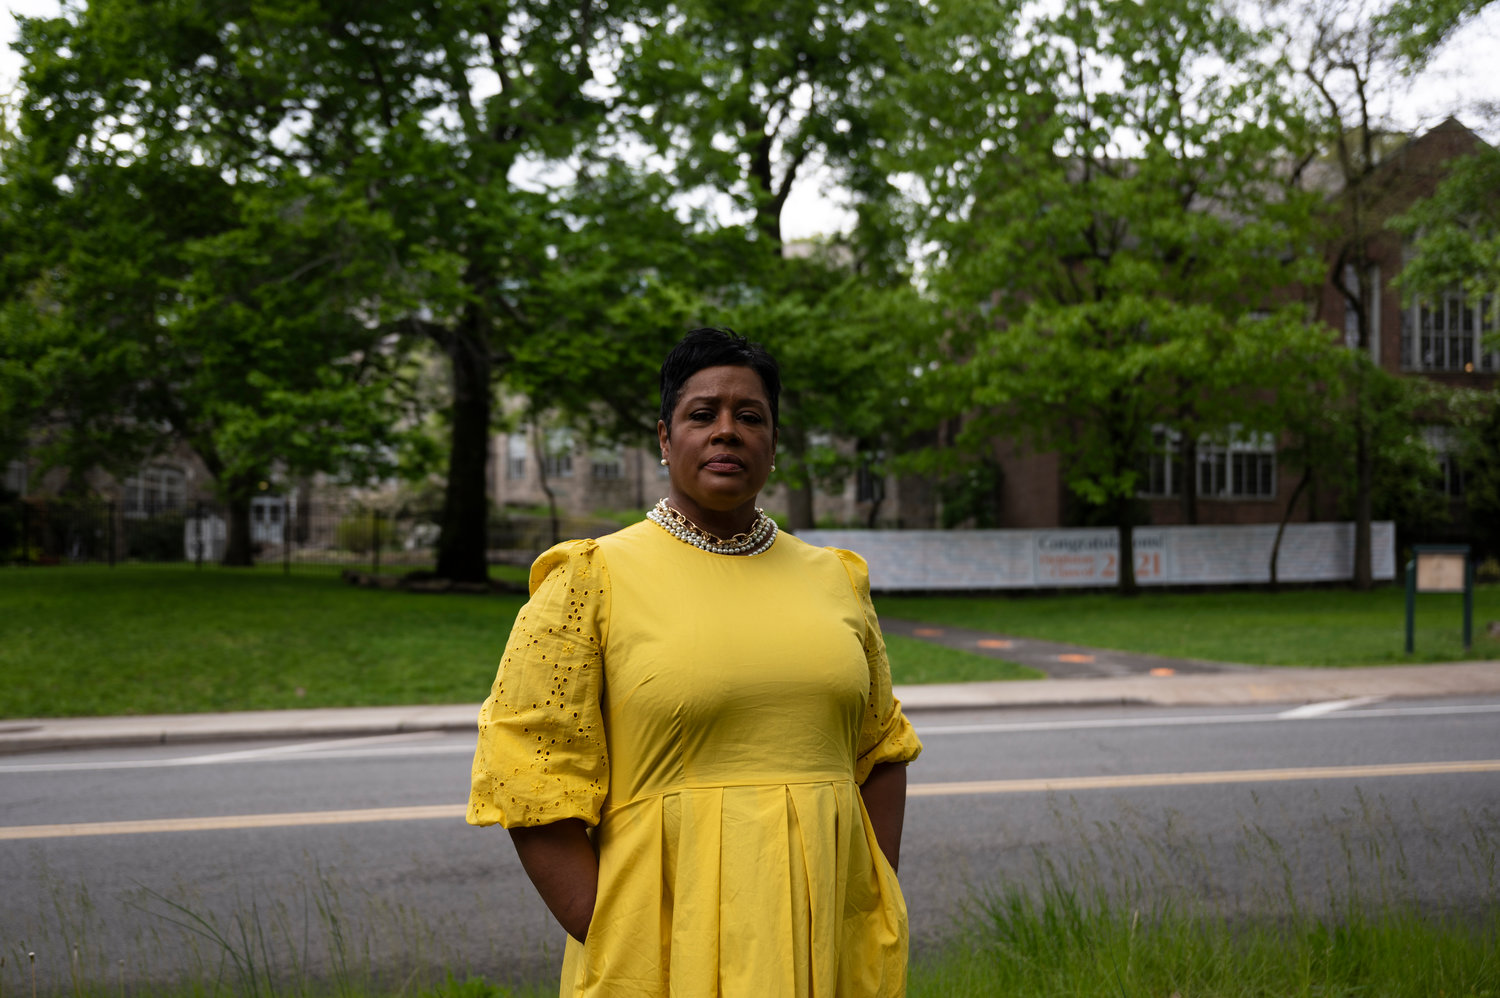 Kim Emile is one of the plaintiffs in a recent lawsuit accusing Ethical Culture Fieldston School of racial discrimination. She’s an alumna of the school, and her son and daughter attended the school as well.